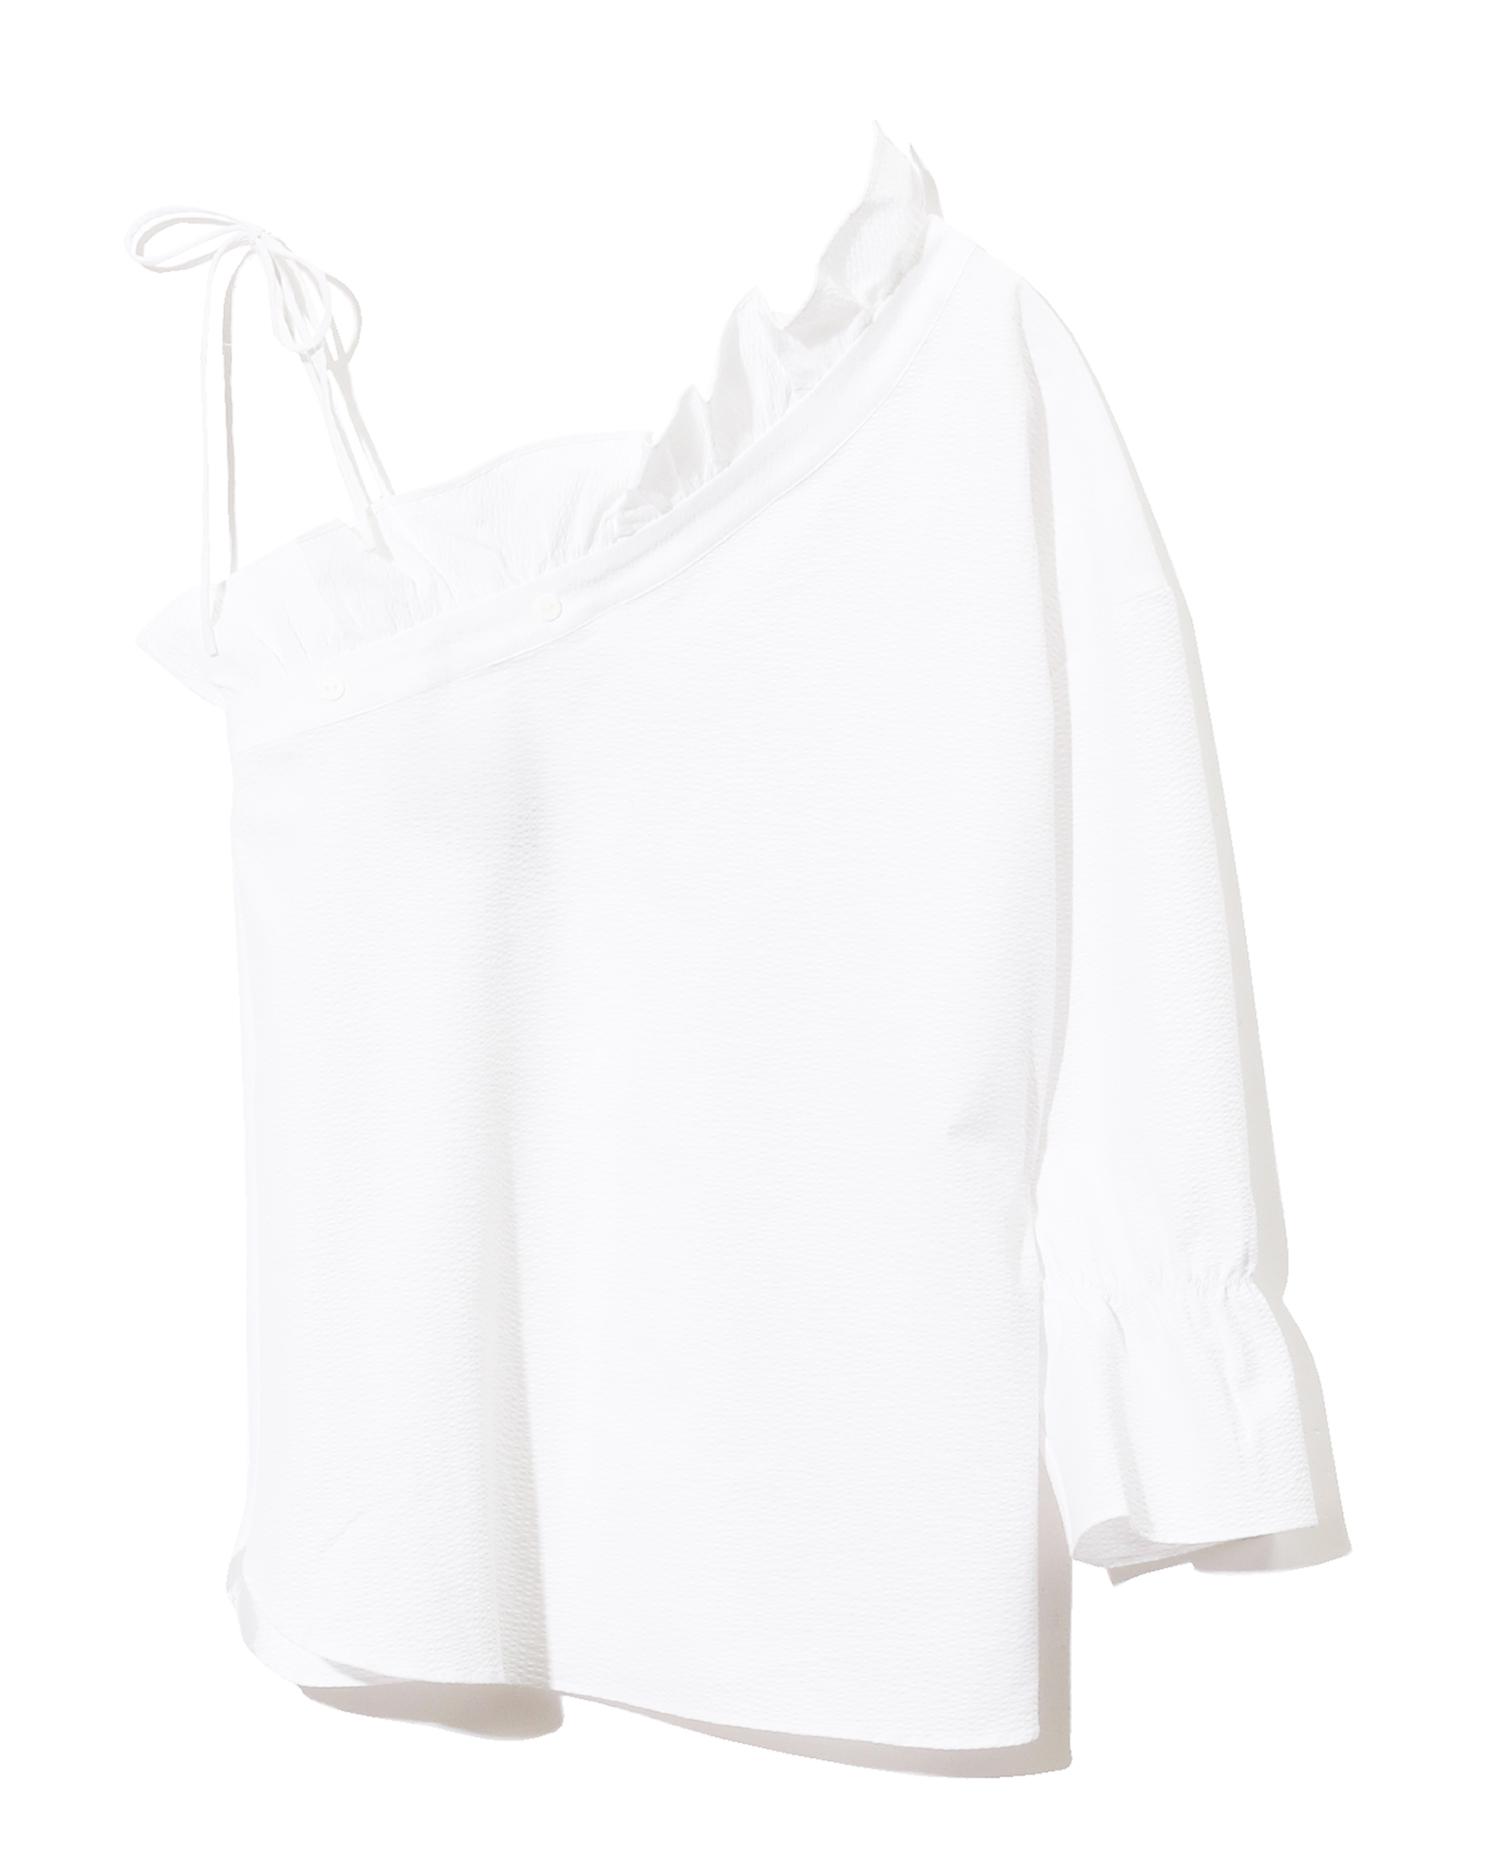 Ruffle trimmed one-shoulder blouse by DESIGNERS REMIX